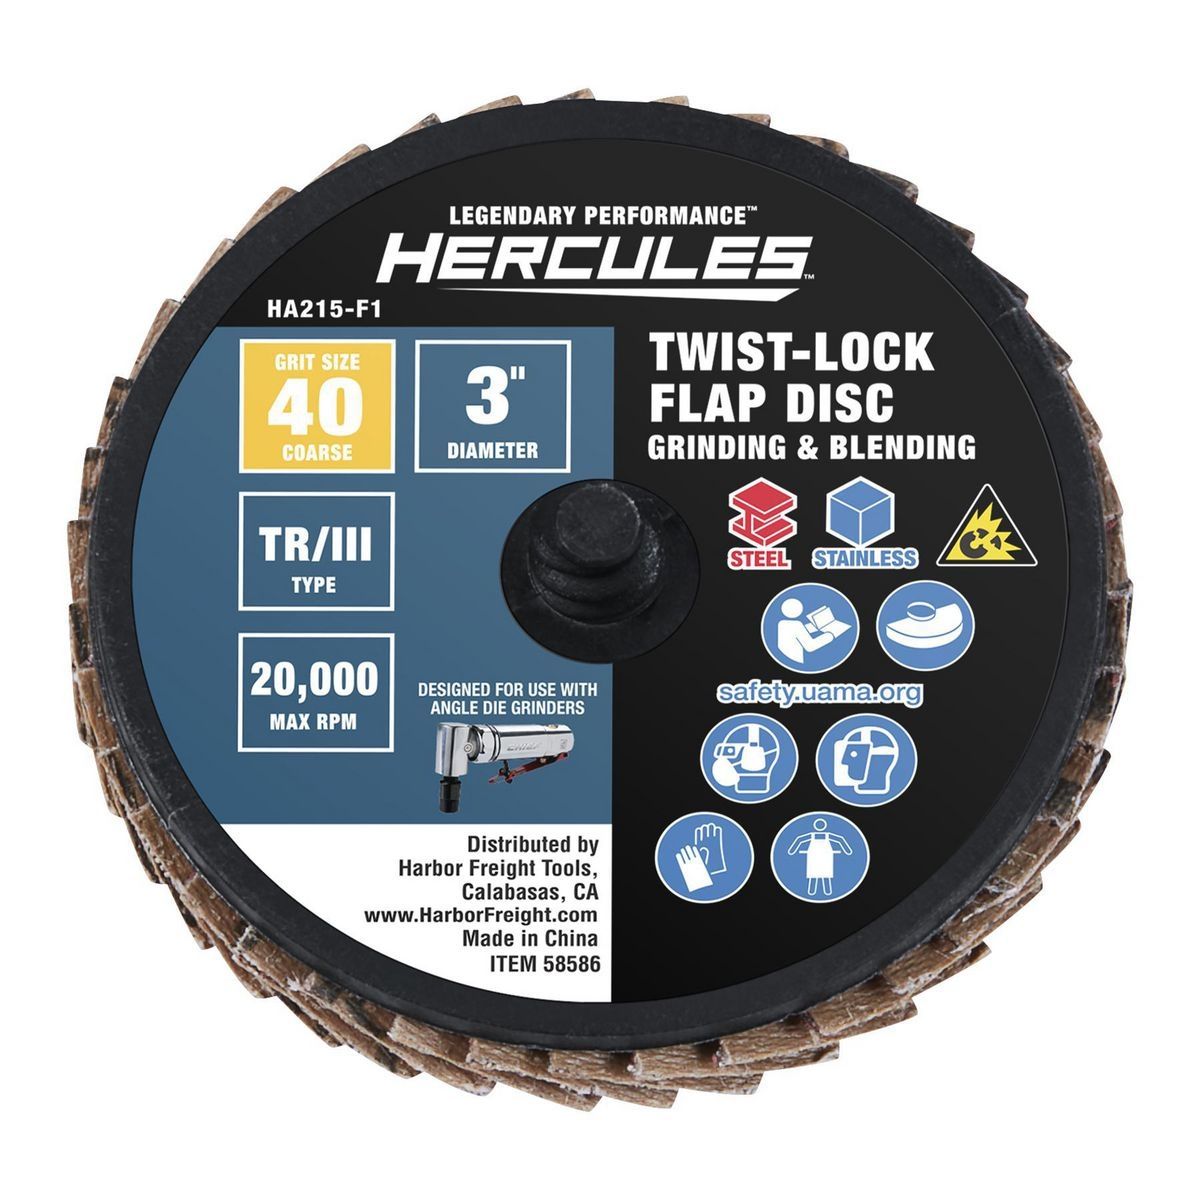 HERCULES 3 in. 40-Grit Type TR/III Twist Lock Flap Discs with Plastic Backing and Ceramic Grain, 3 Pack